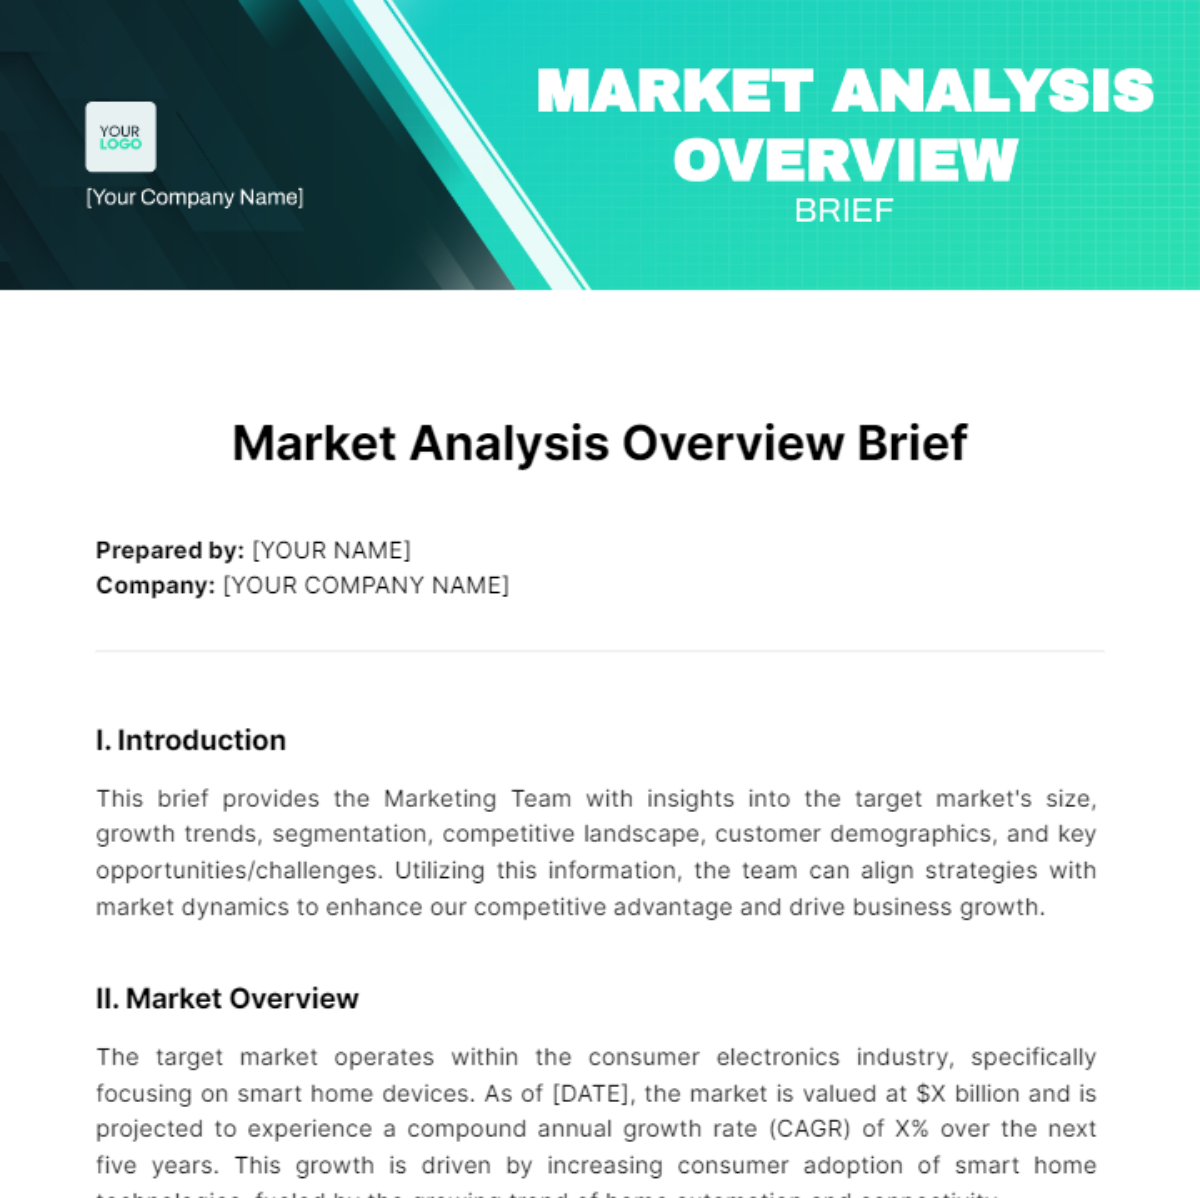 Market Analysis Overview Brief Template